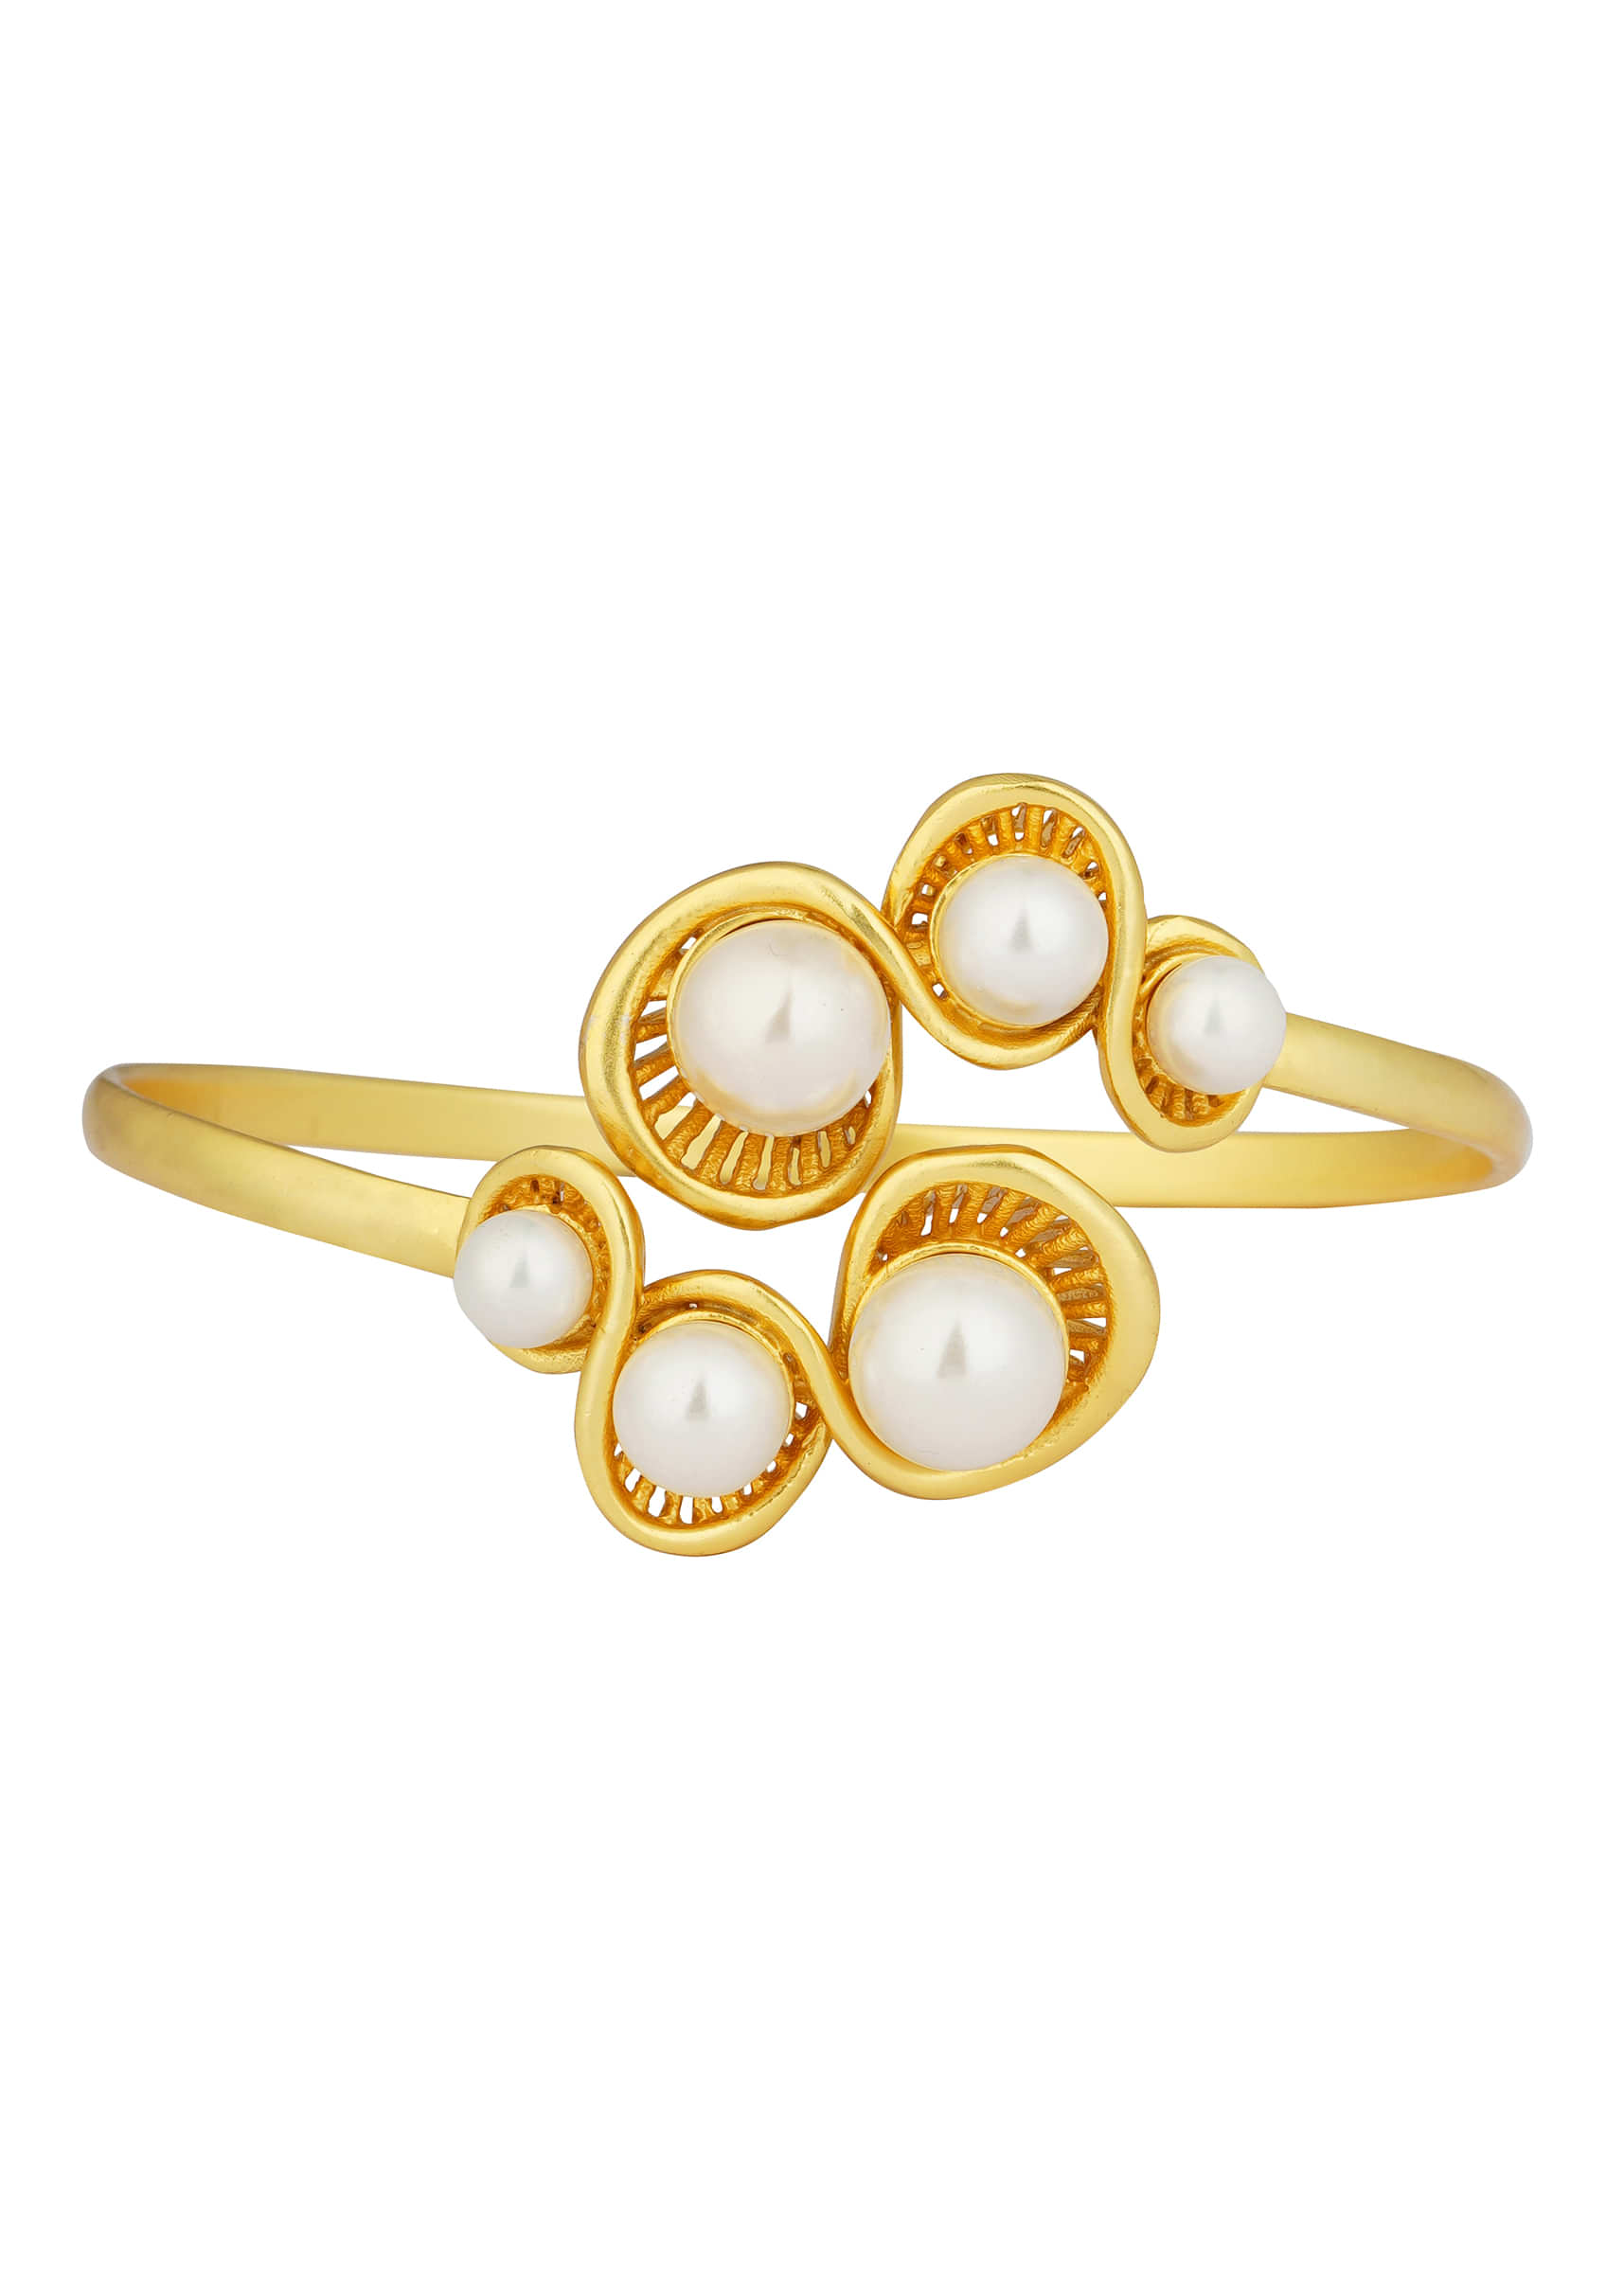 Gold 22K Cuff Bangle With White Shell Pearl 